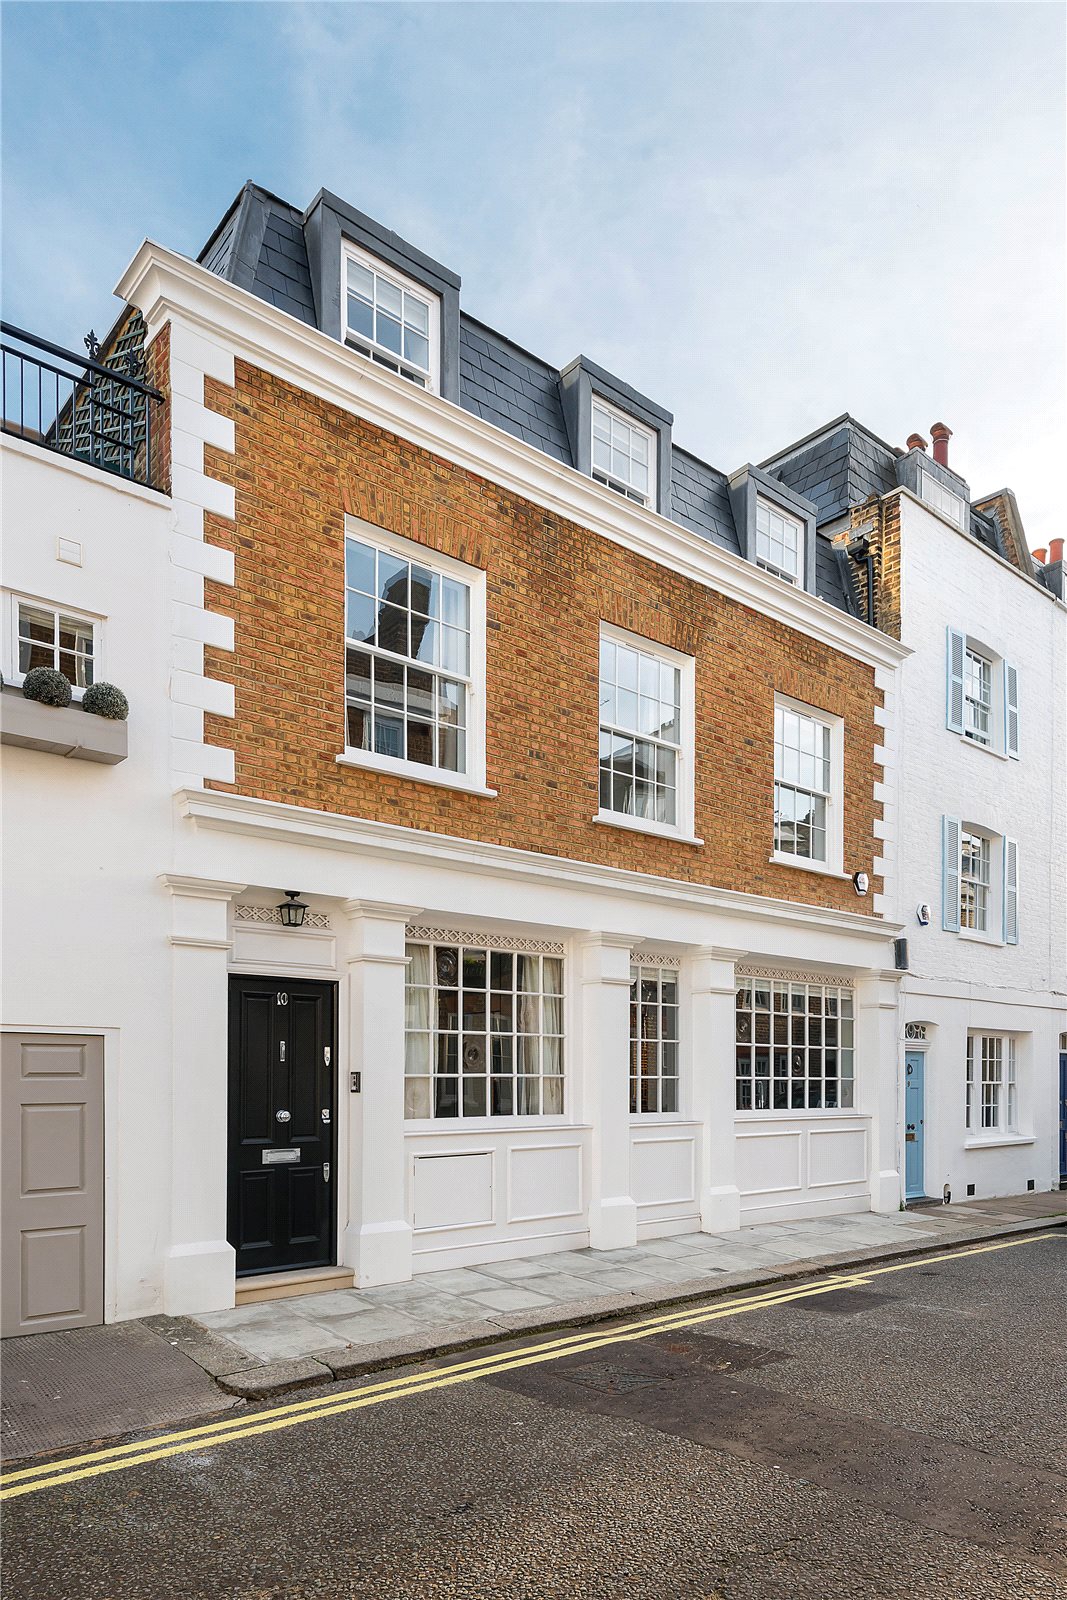 London Real Estate And Apartments For Sale Christie S